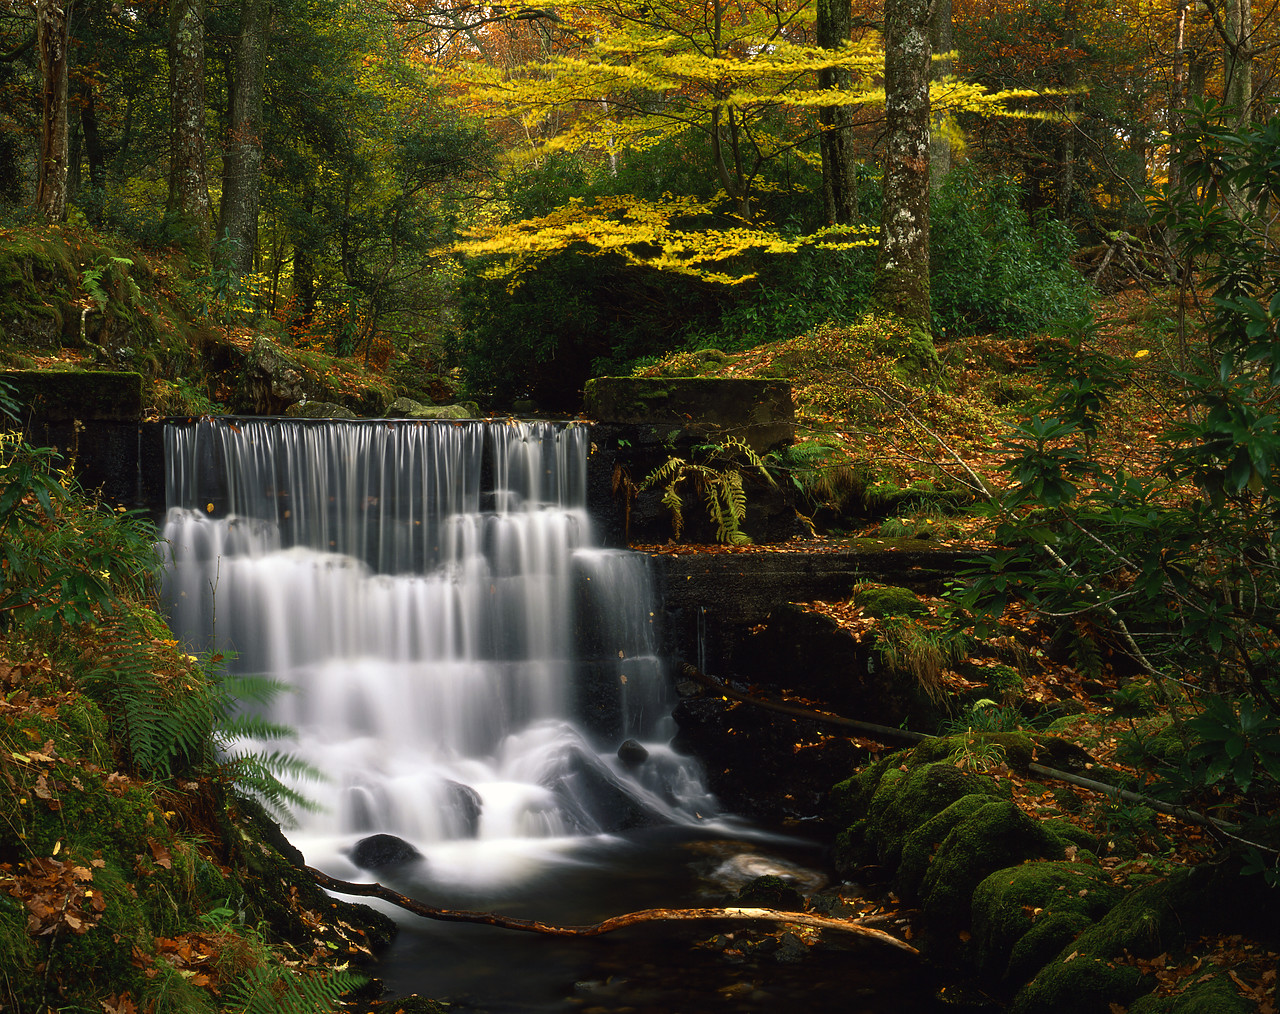 #030385-2 - Waterfall in Autumn, Lake District National Park, Cumbria, England